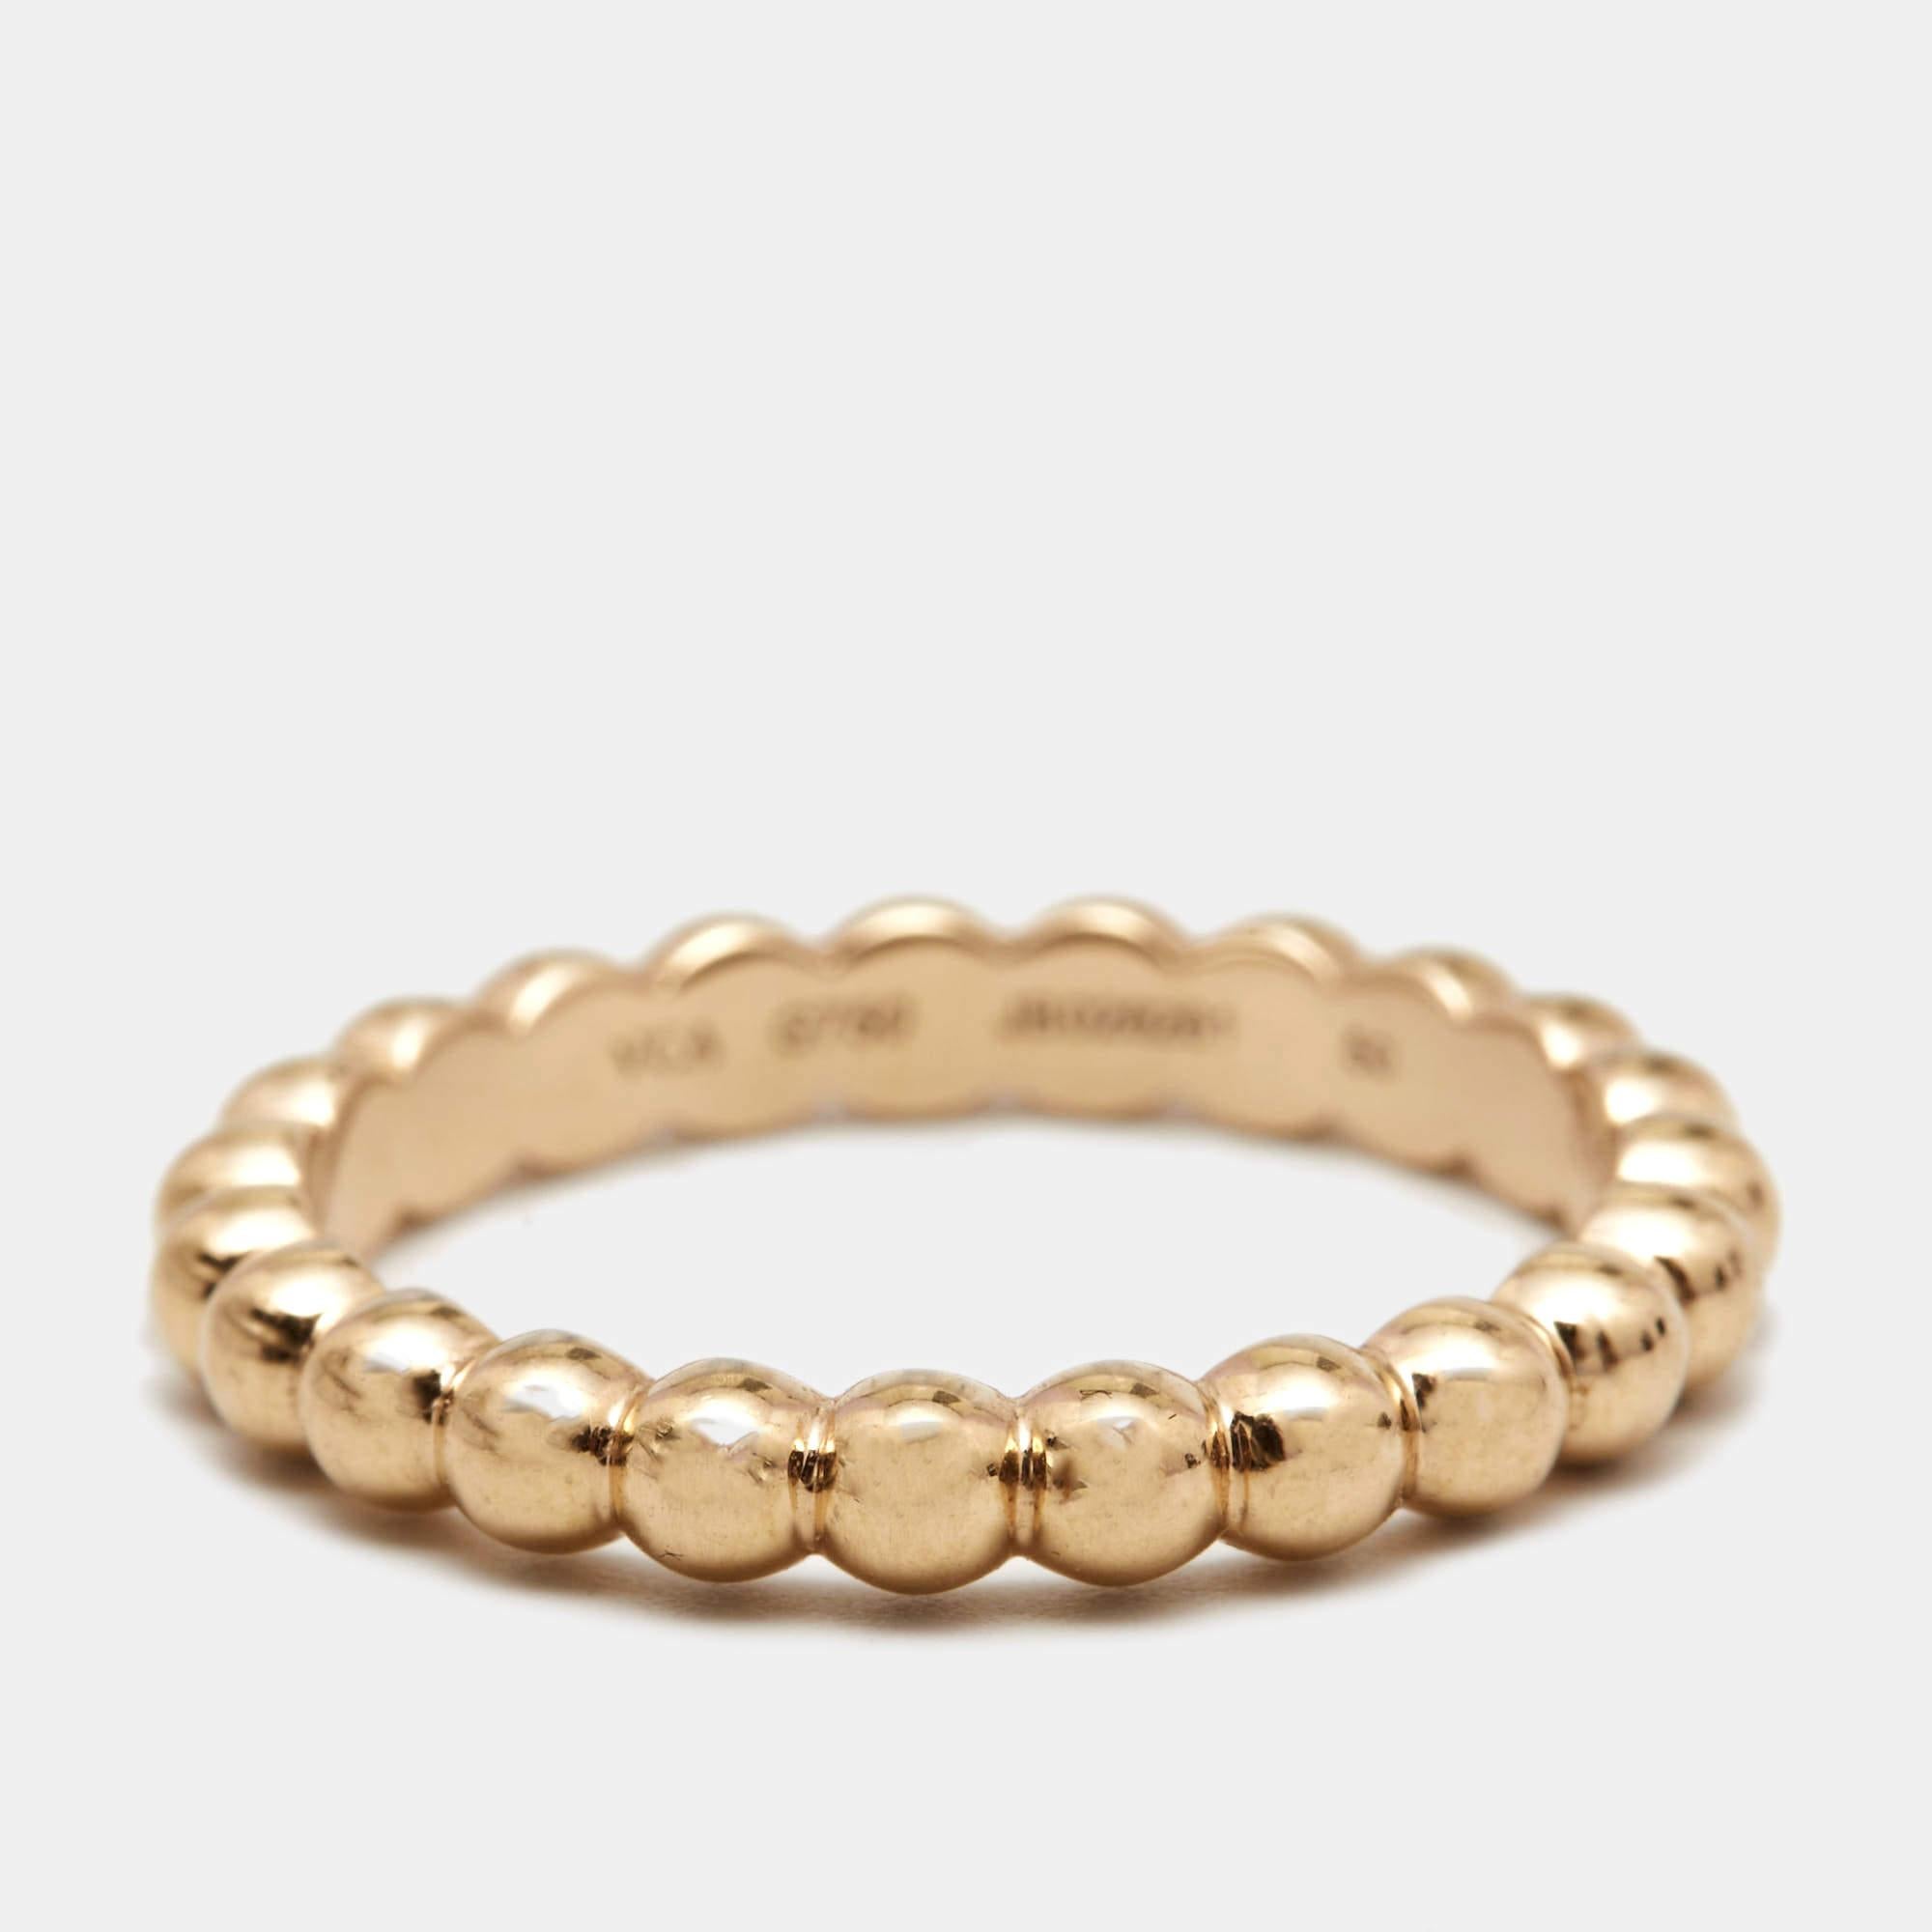 This sleek and classic Perle ring from the house of Van Cleef & Arpels has been expertly crafted in 18k rose gold. It comes with an all-over bead detailing. Wear it as a stand-alone ring or stacked with similar band rings for a chic look.